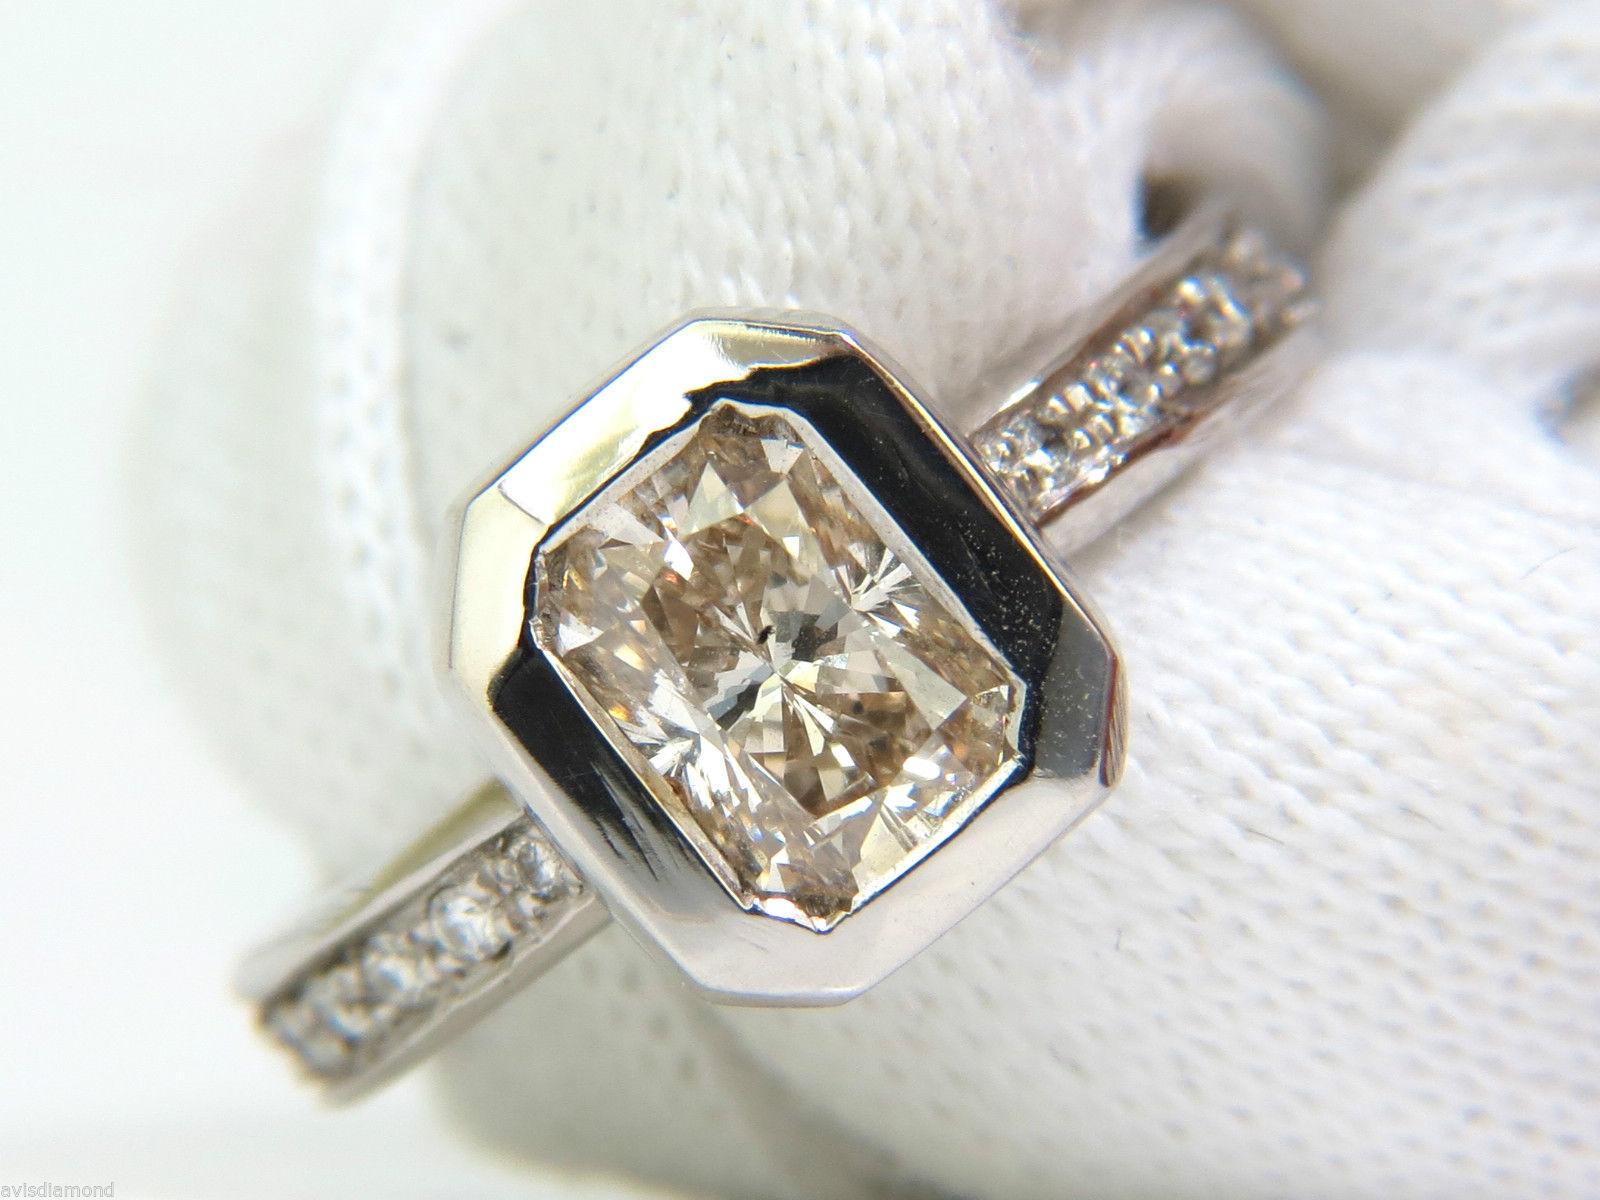 Modern Deco

1.12ct. Radiant diamond 

Si-2 clarity



.40ct. side diamonds

G-color, Si-1 clarity



4.4 grams



Deck of ring 

9.7 X 8.6mm



Depth: 4.9mm



size: 5.25

(no resizing possible)

14kt. white gold. 

$8000 appraisal will accompany